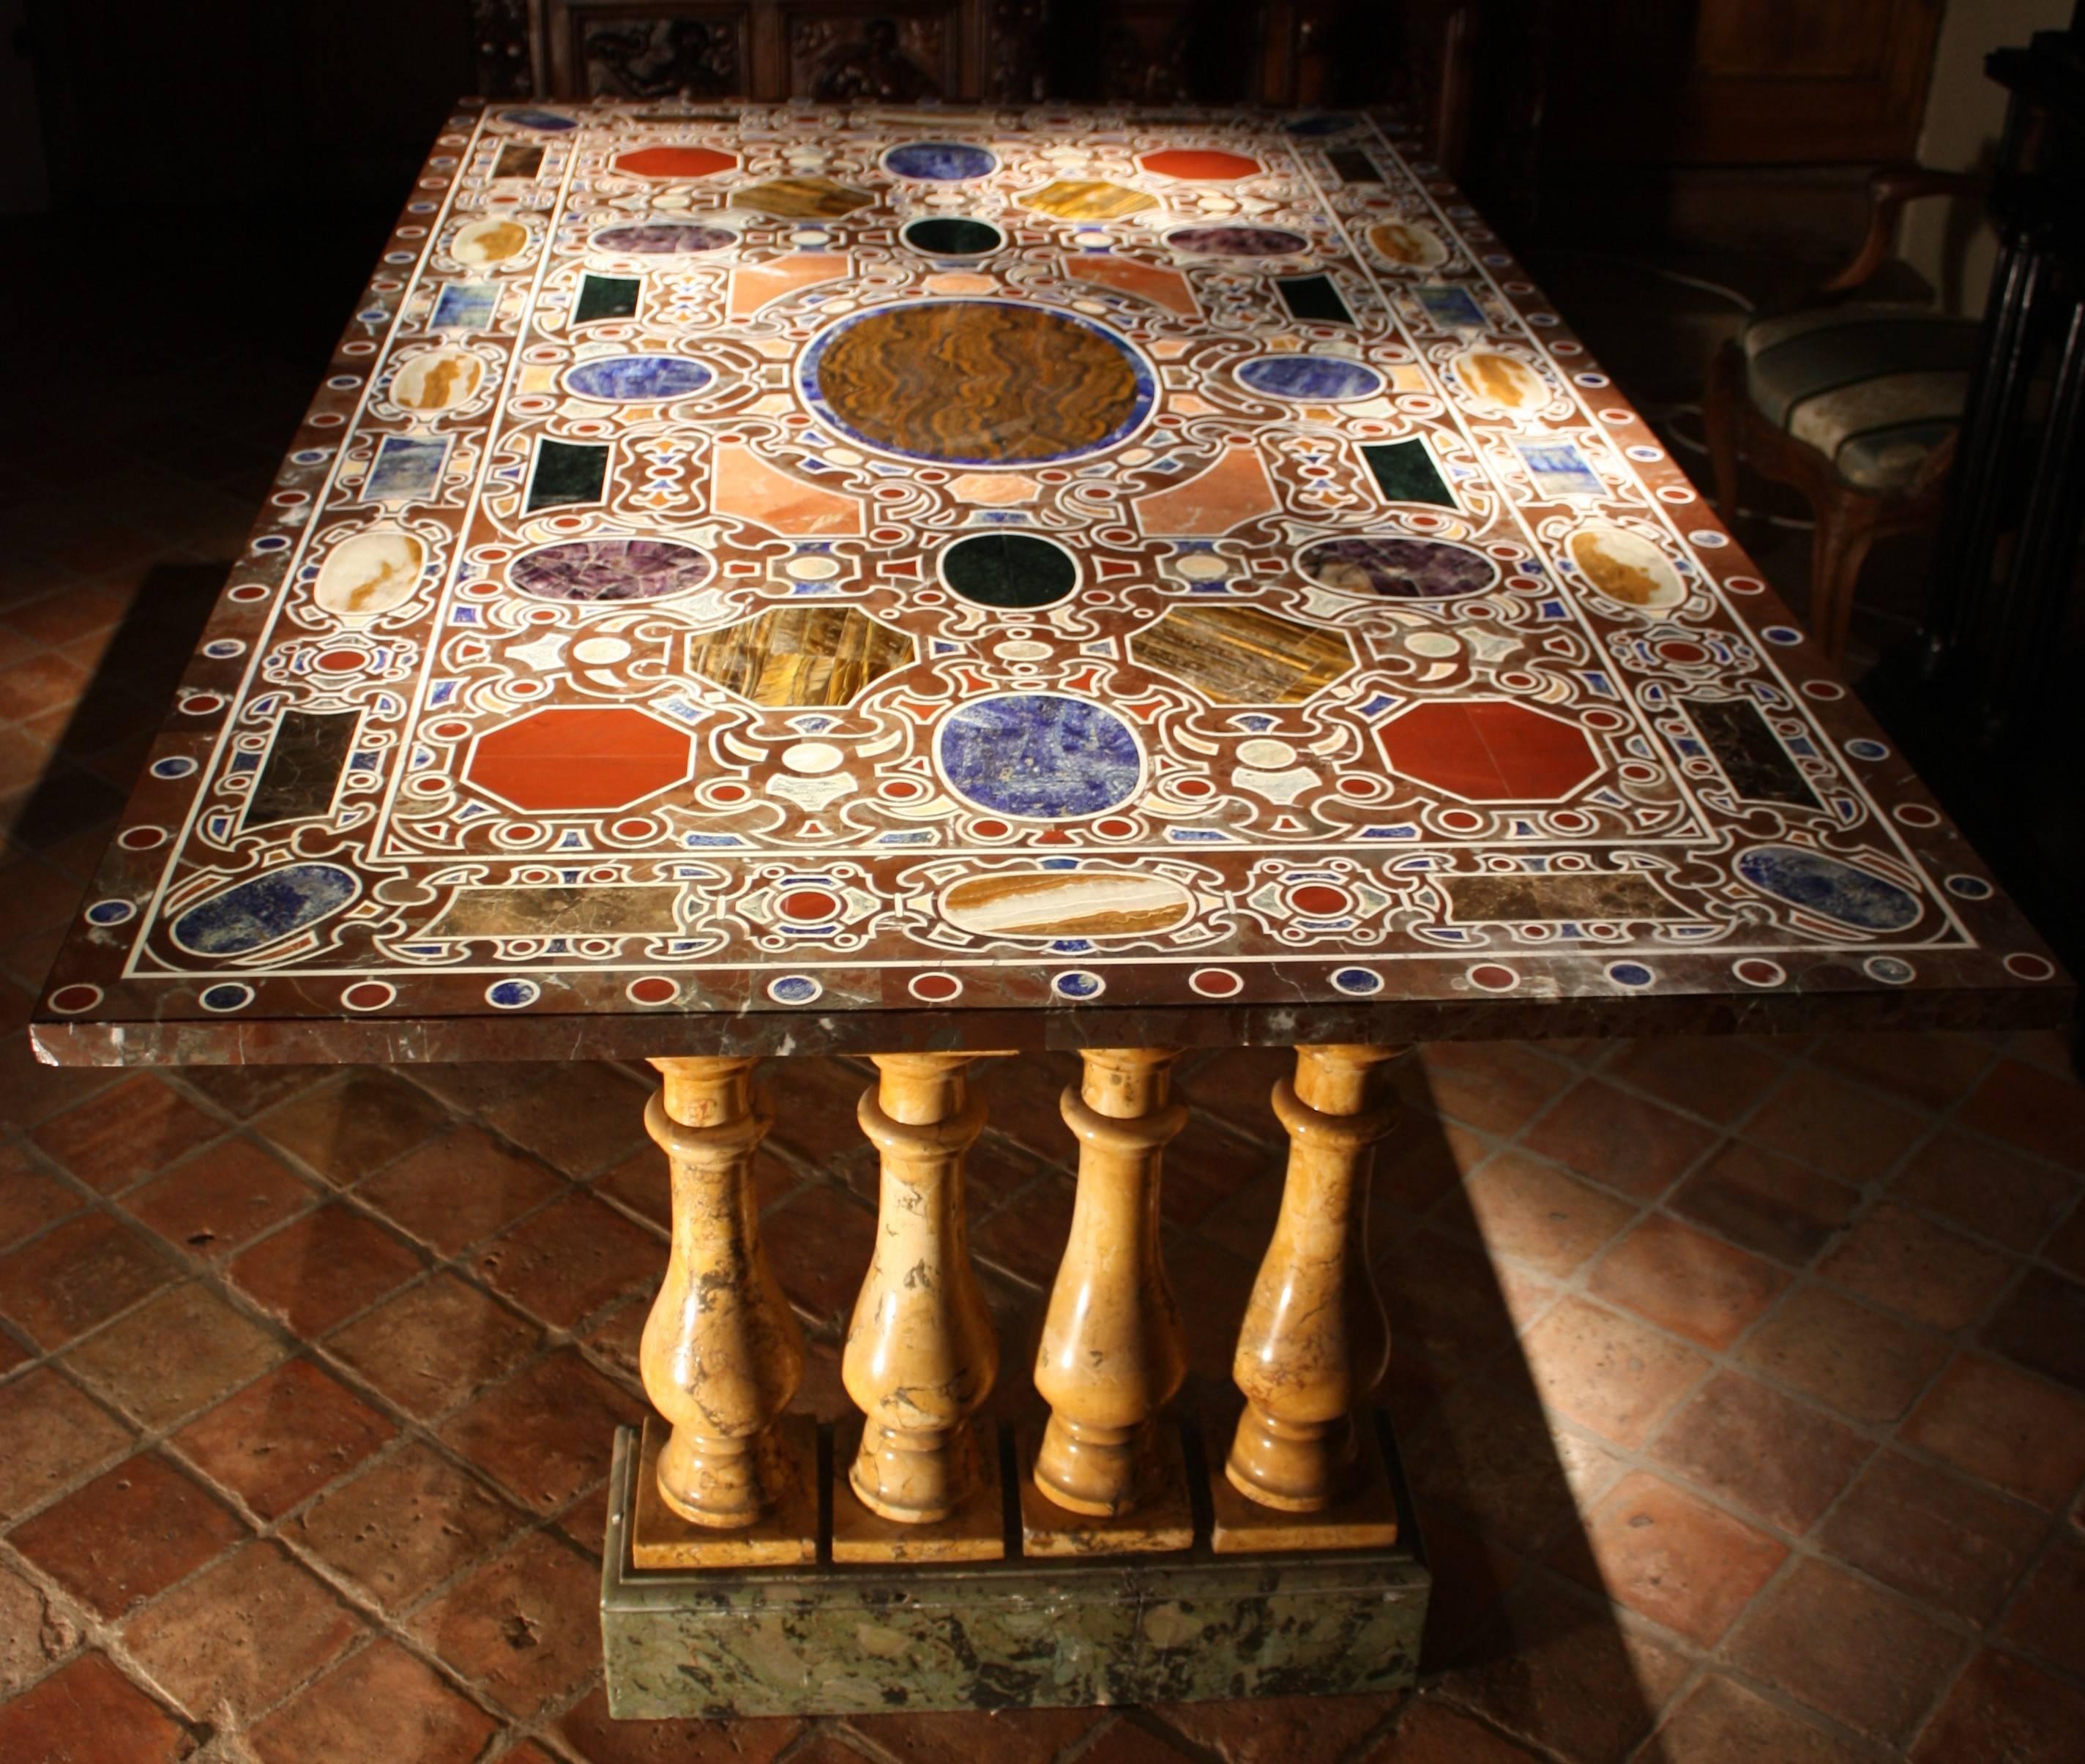 A rare 19th century Florentine table, inlay of hard stones and marble, Italy.
The tabletop with geometric inlays of marble and hard stones.
It is a 19th century copy of an original Renaissance model, that is exhibited at the Hermitage Museum,